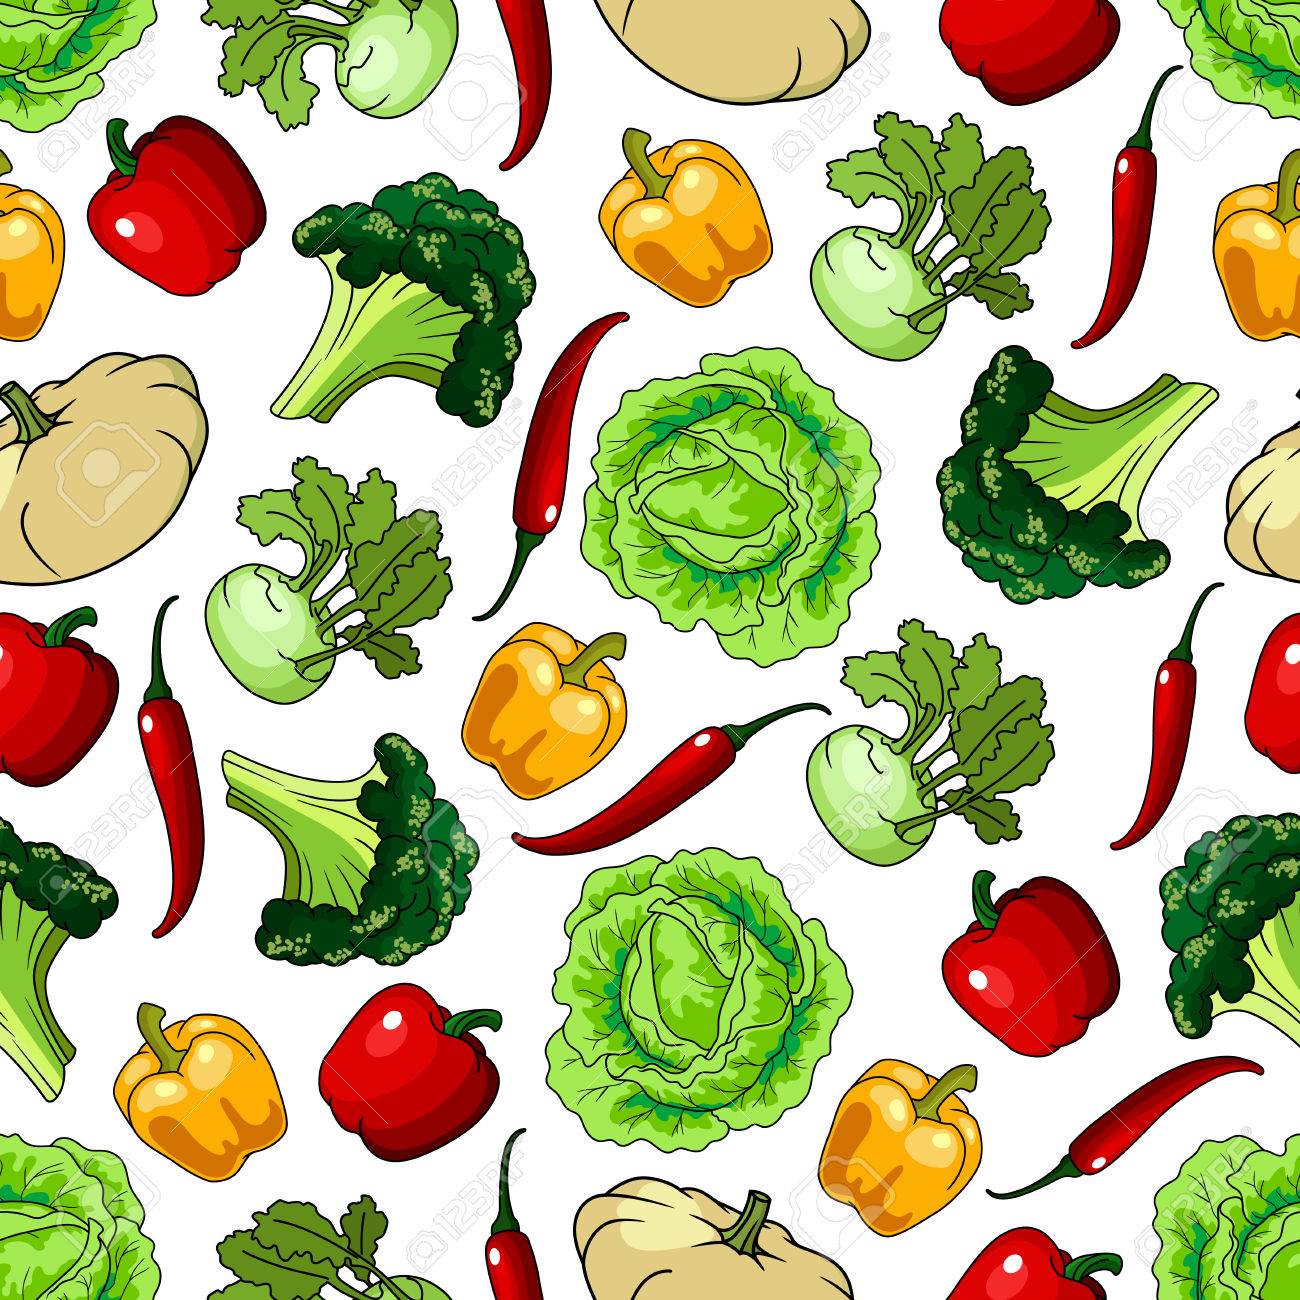 Vegetables Seamless Background Wallpaper With Pattern Of Fresh